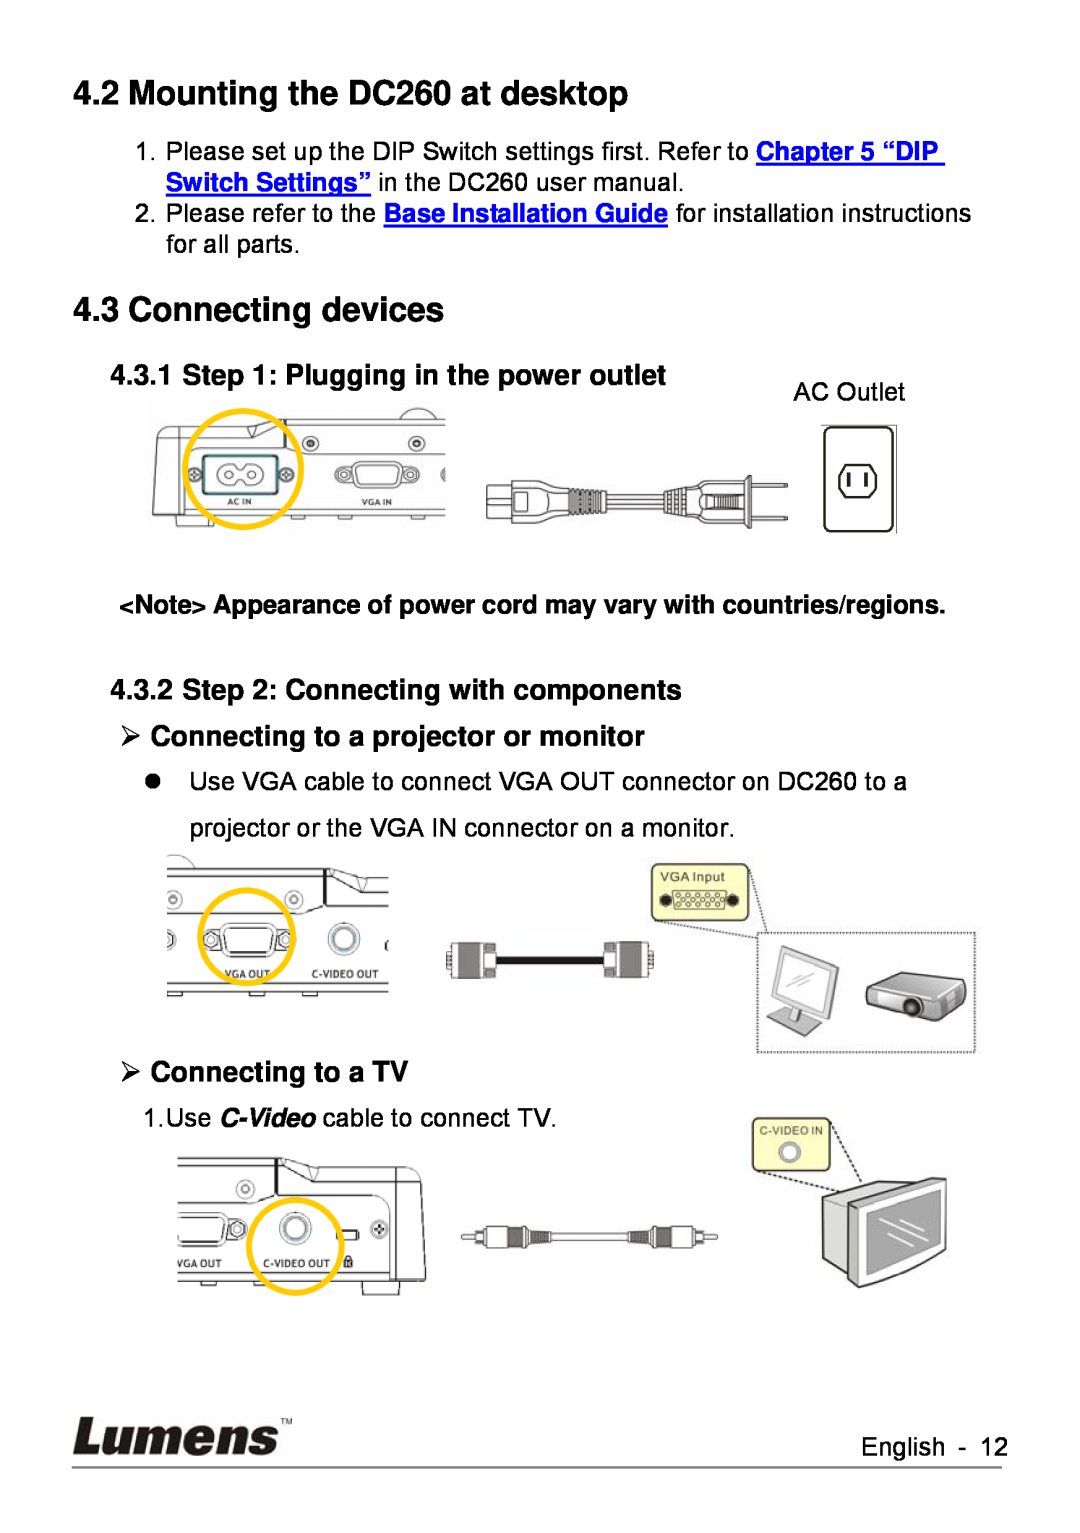 Lumens Technology Mounting the DC260 at desktop, Connecting devices, Plugging in the power outlet, ¾ Connecting to a TV 